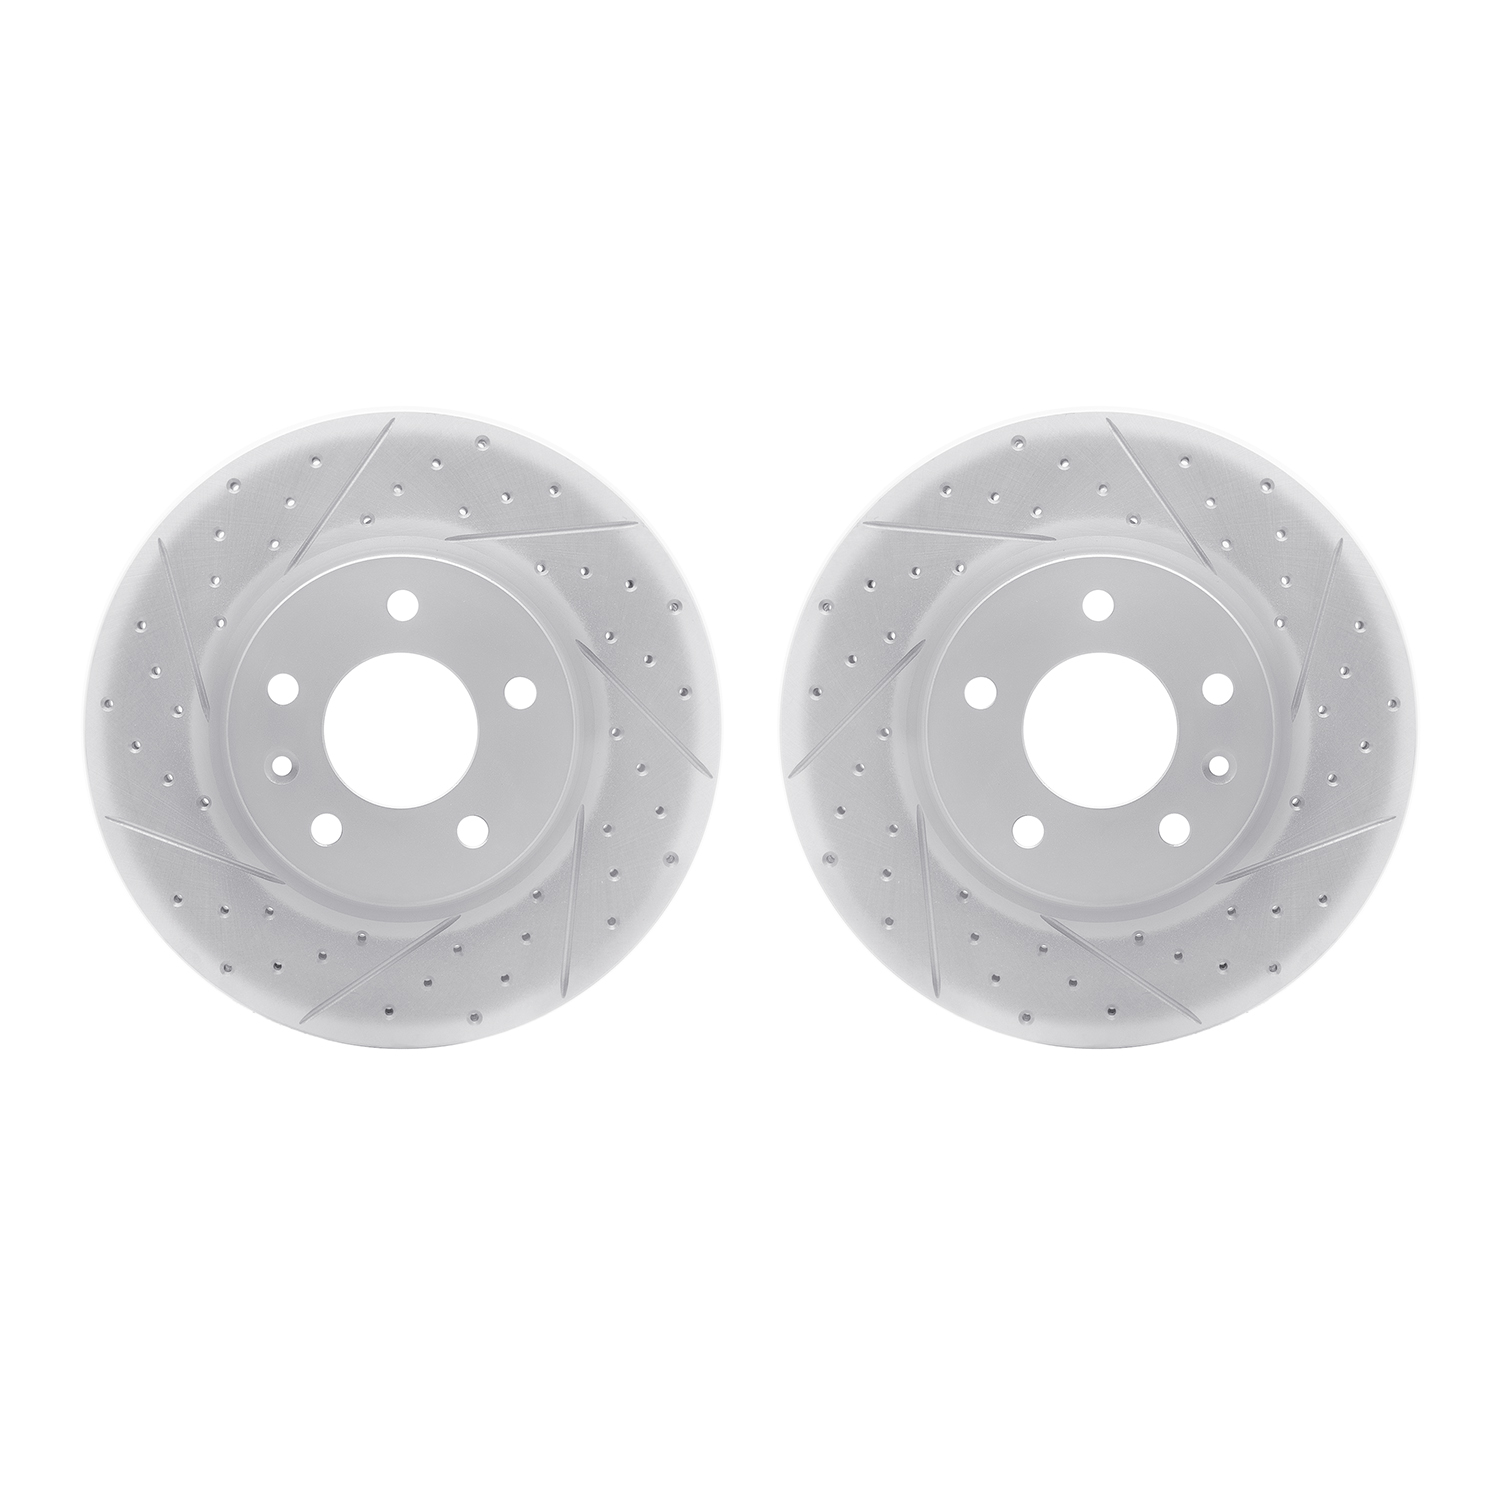 2002-45003 Geoperformance Drilled/Slotted Brake Rotors, Fits Select GM, Position: Front